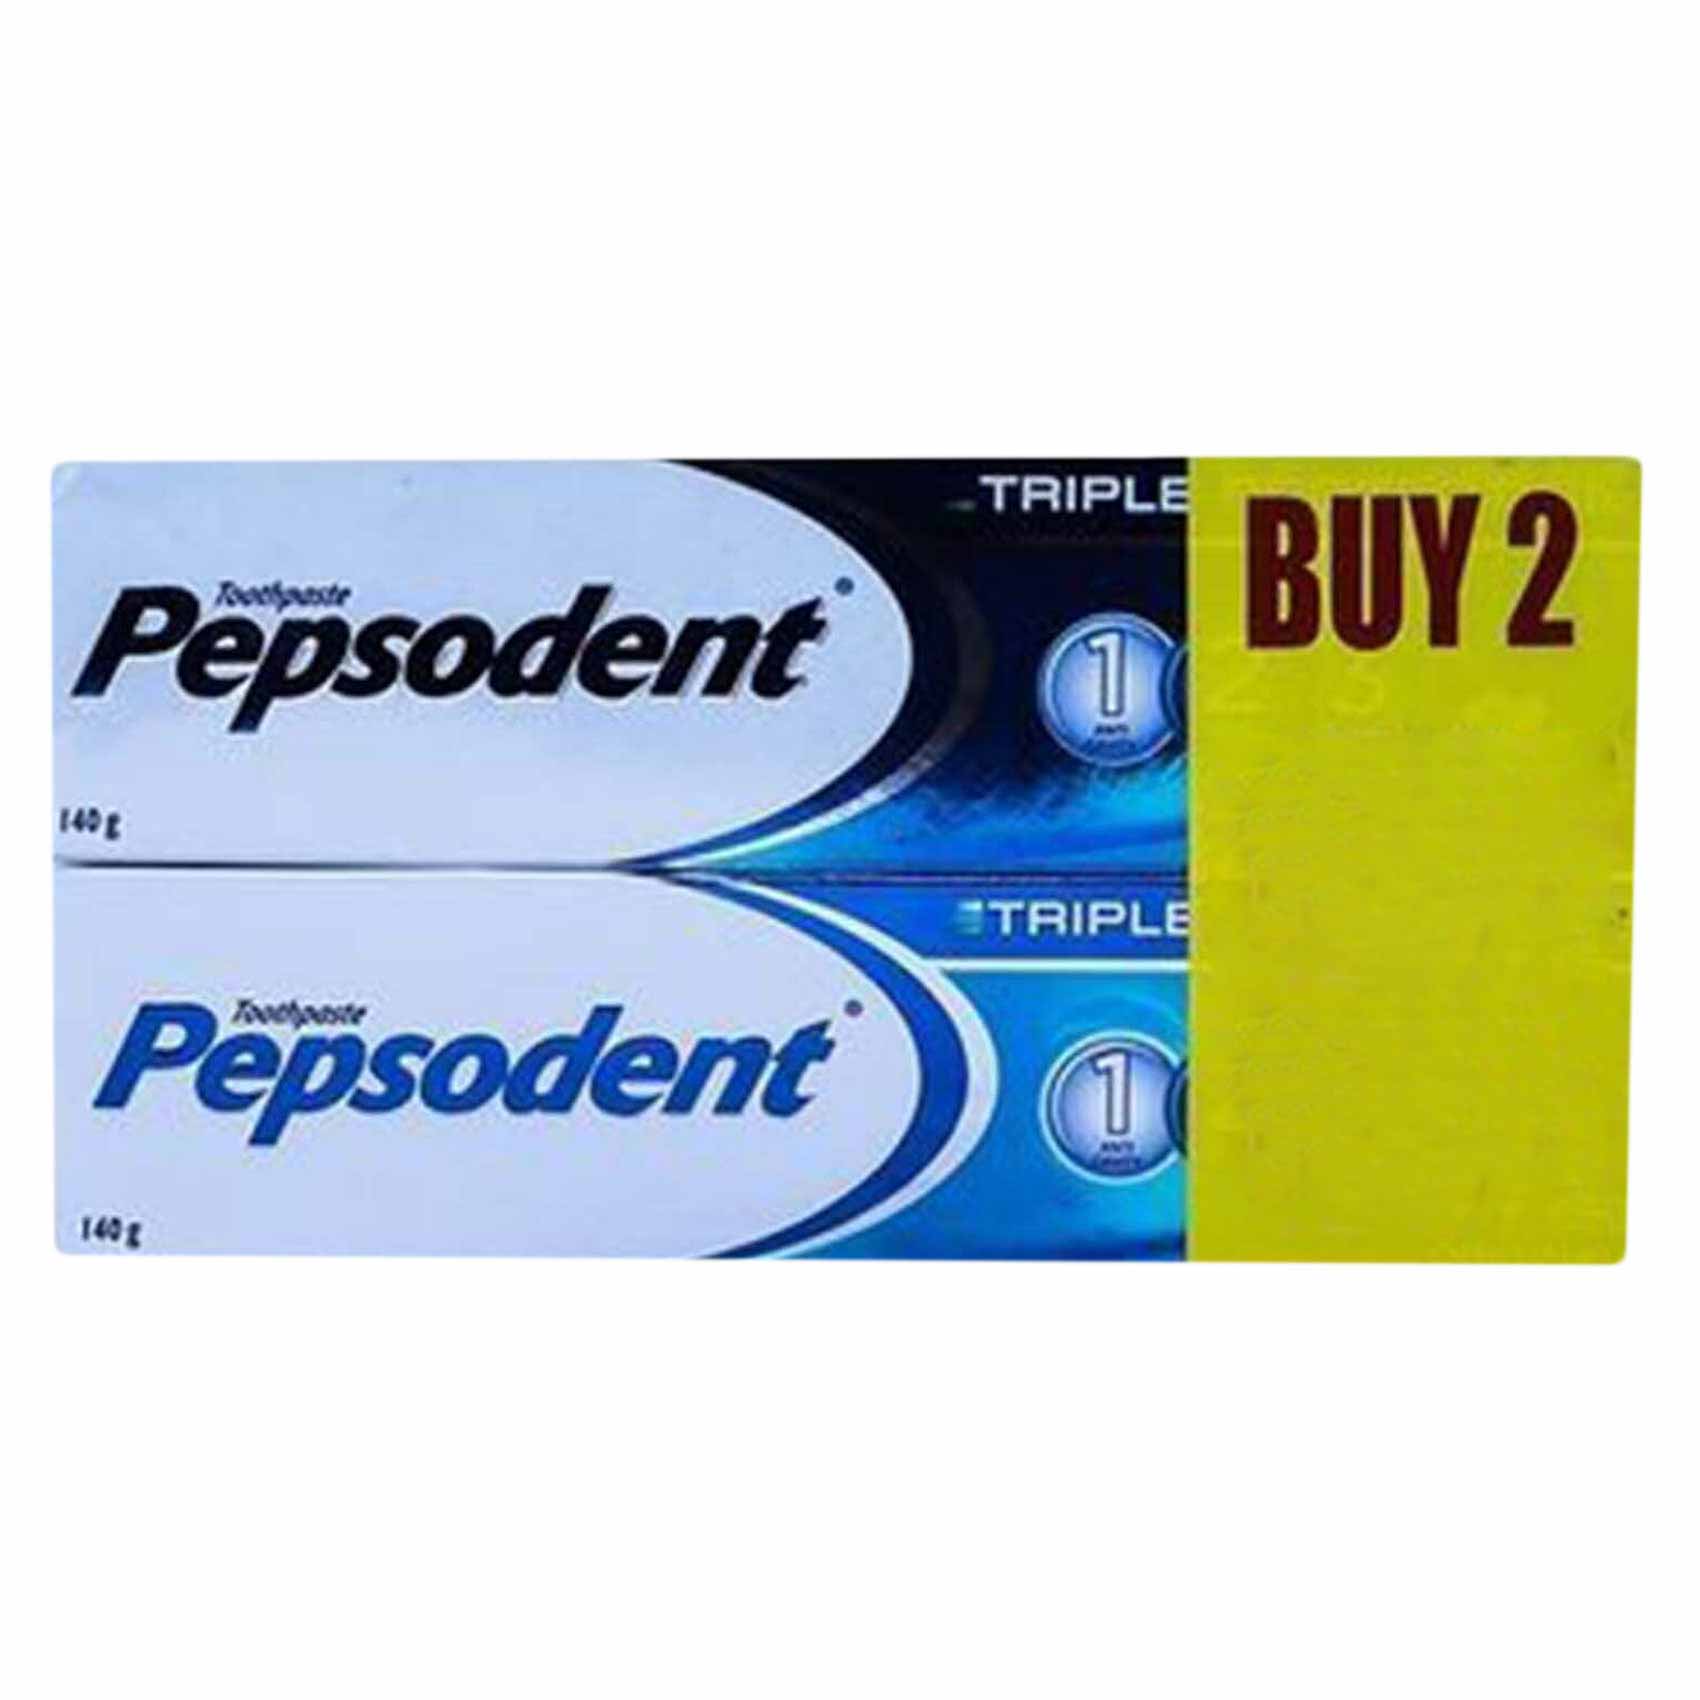 Pepsodent Toothpaste 140G Promo Pack